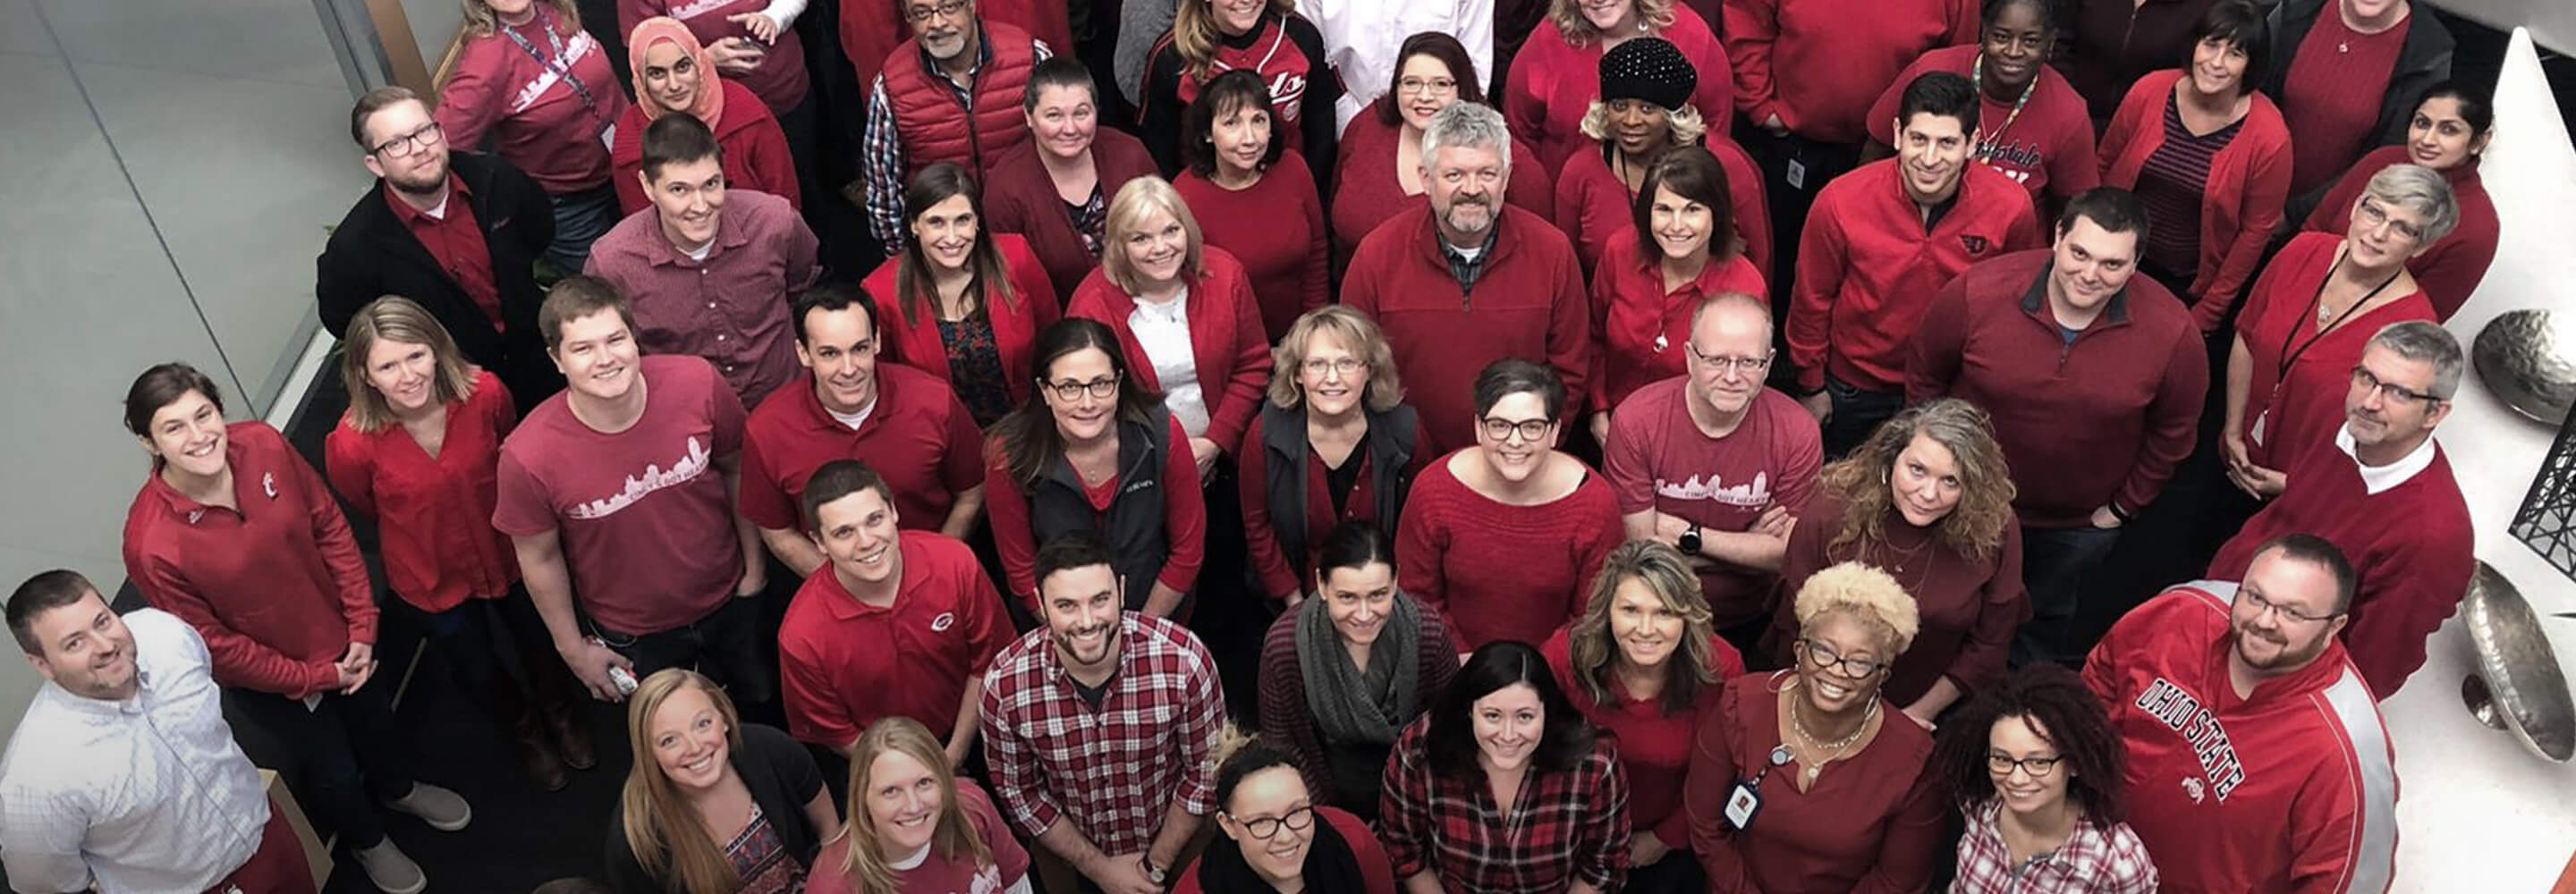 Wear Red Day in support of American Heart Association